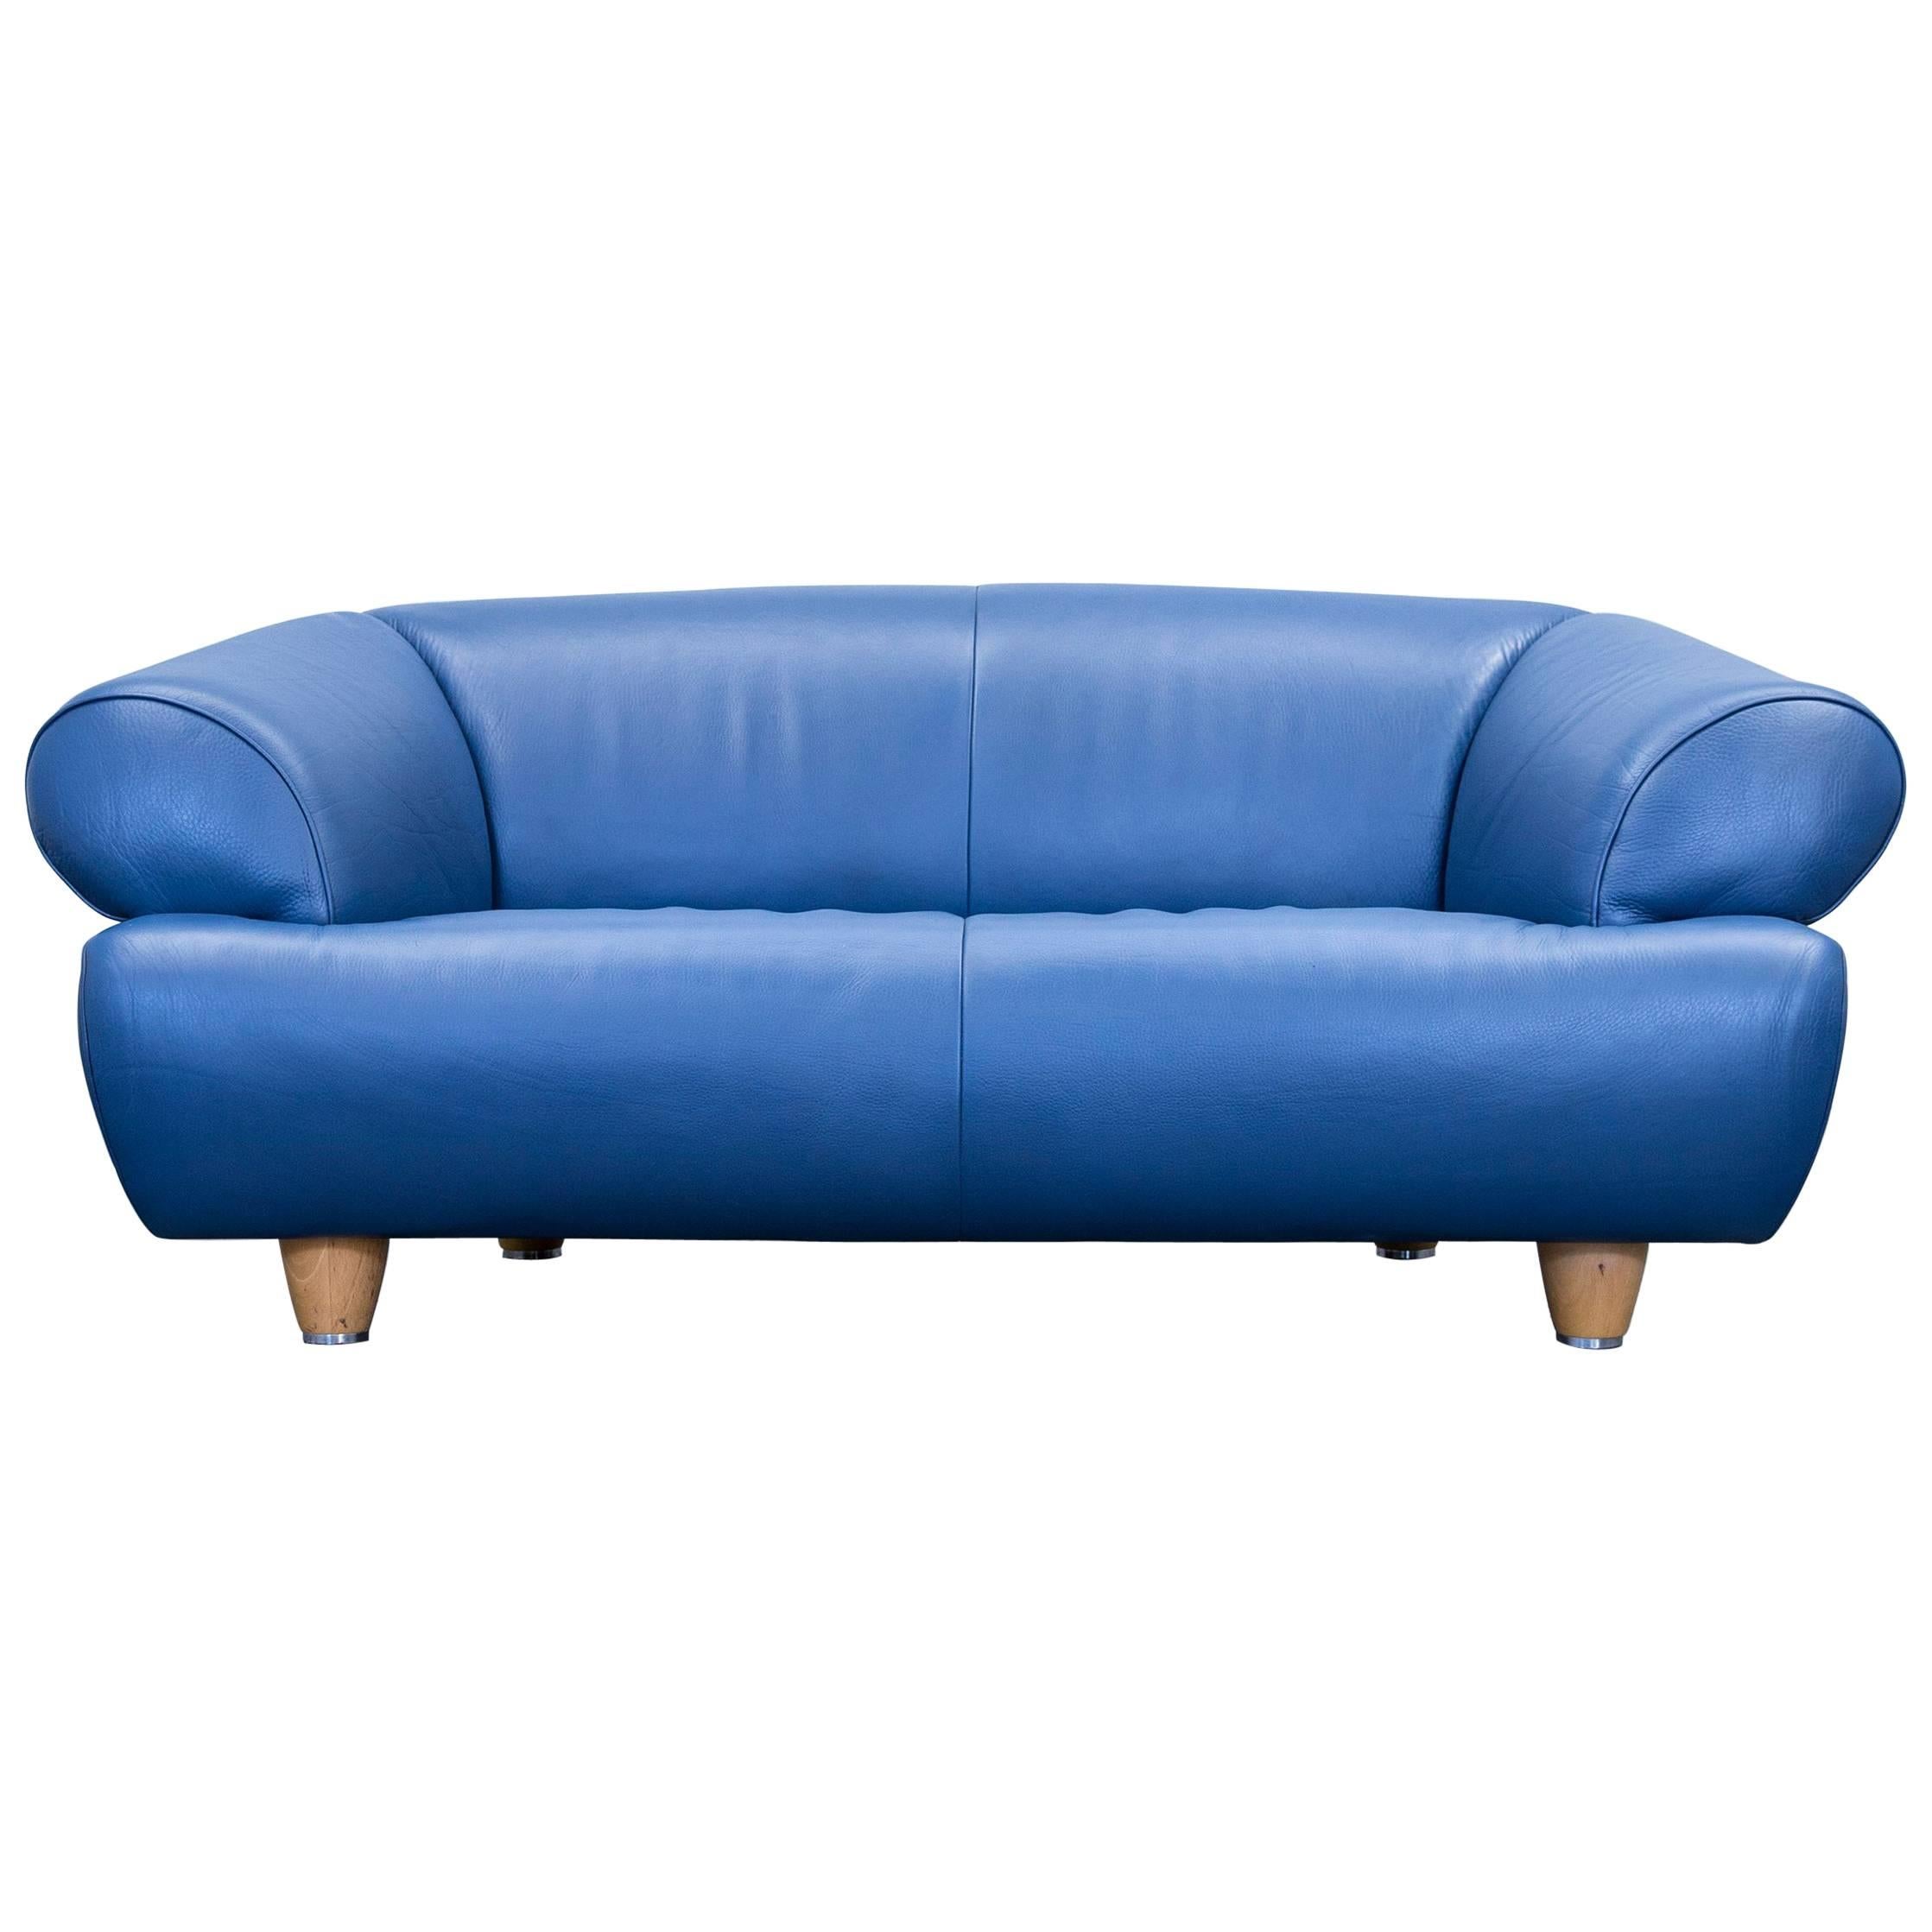 De Sede DS 91 Designer Sofa Leather Blue Two-Seat Couch Modern